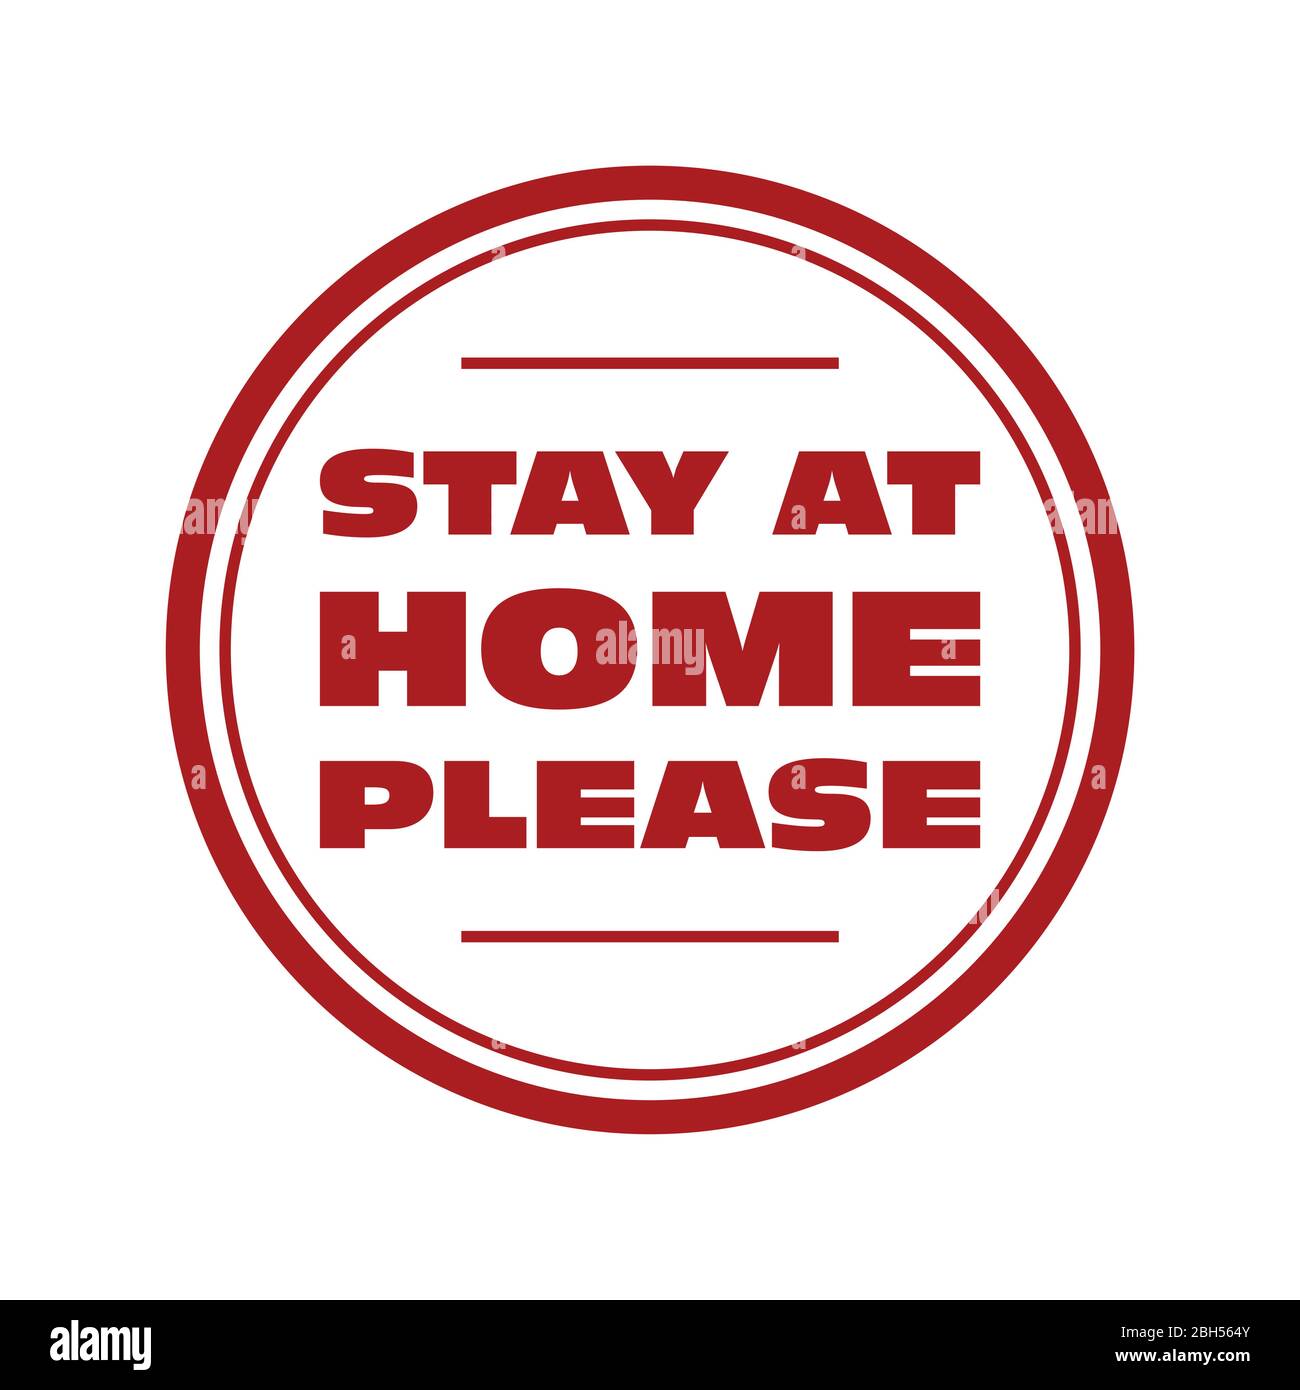 Stay at home please - quarantine sign or sticker, don't go outside Stock Vector